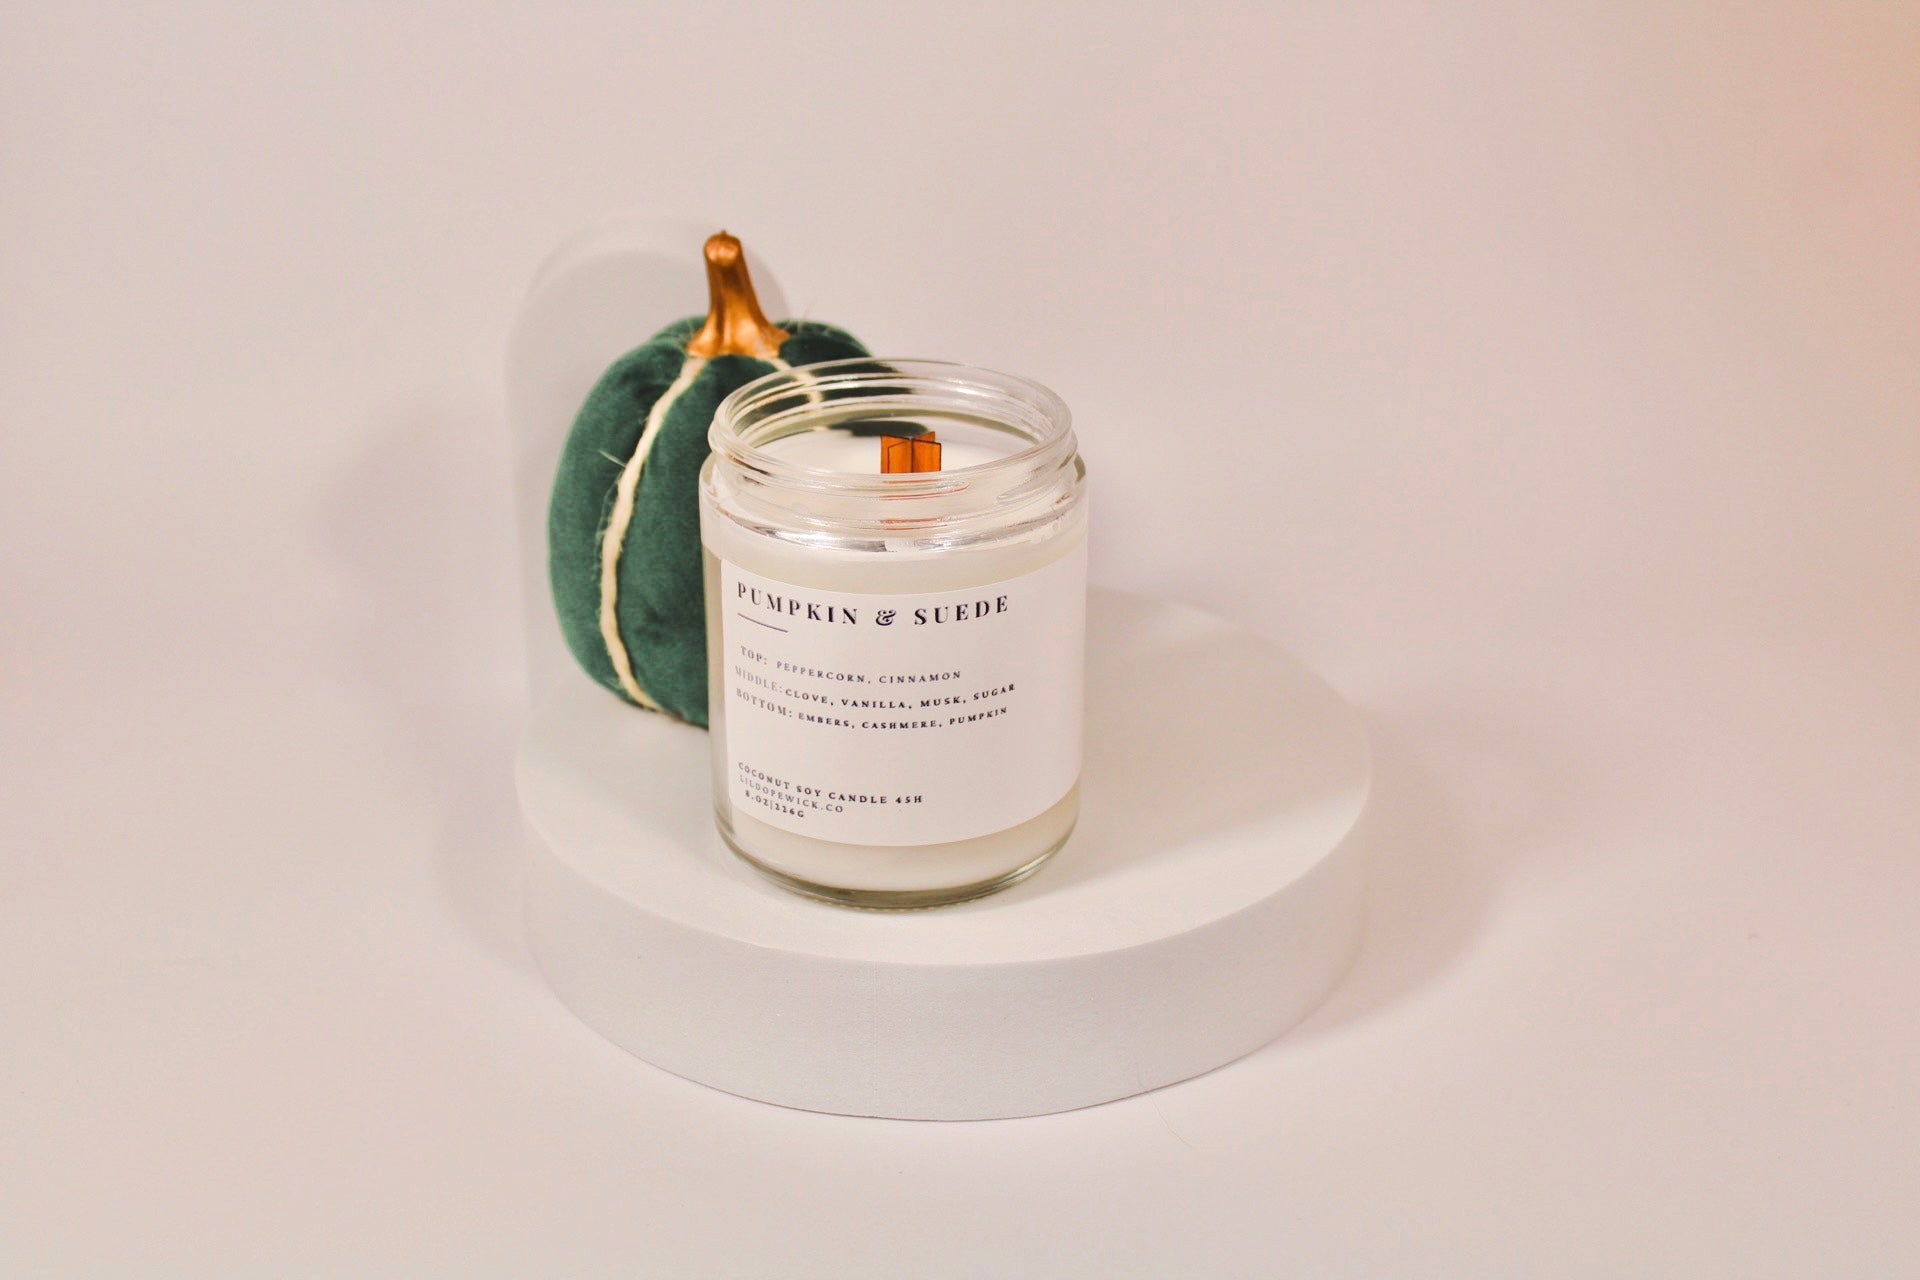 Pumpkin Suede Candle | Lil Dope Wick.co